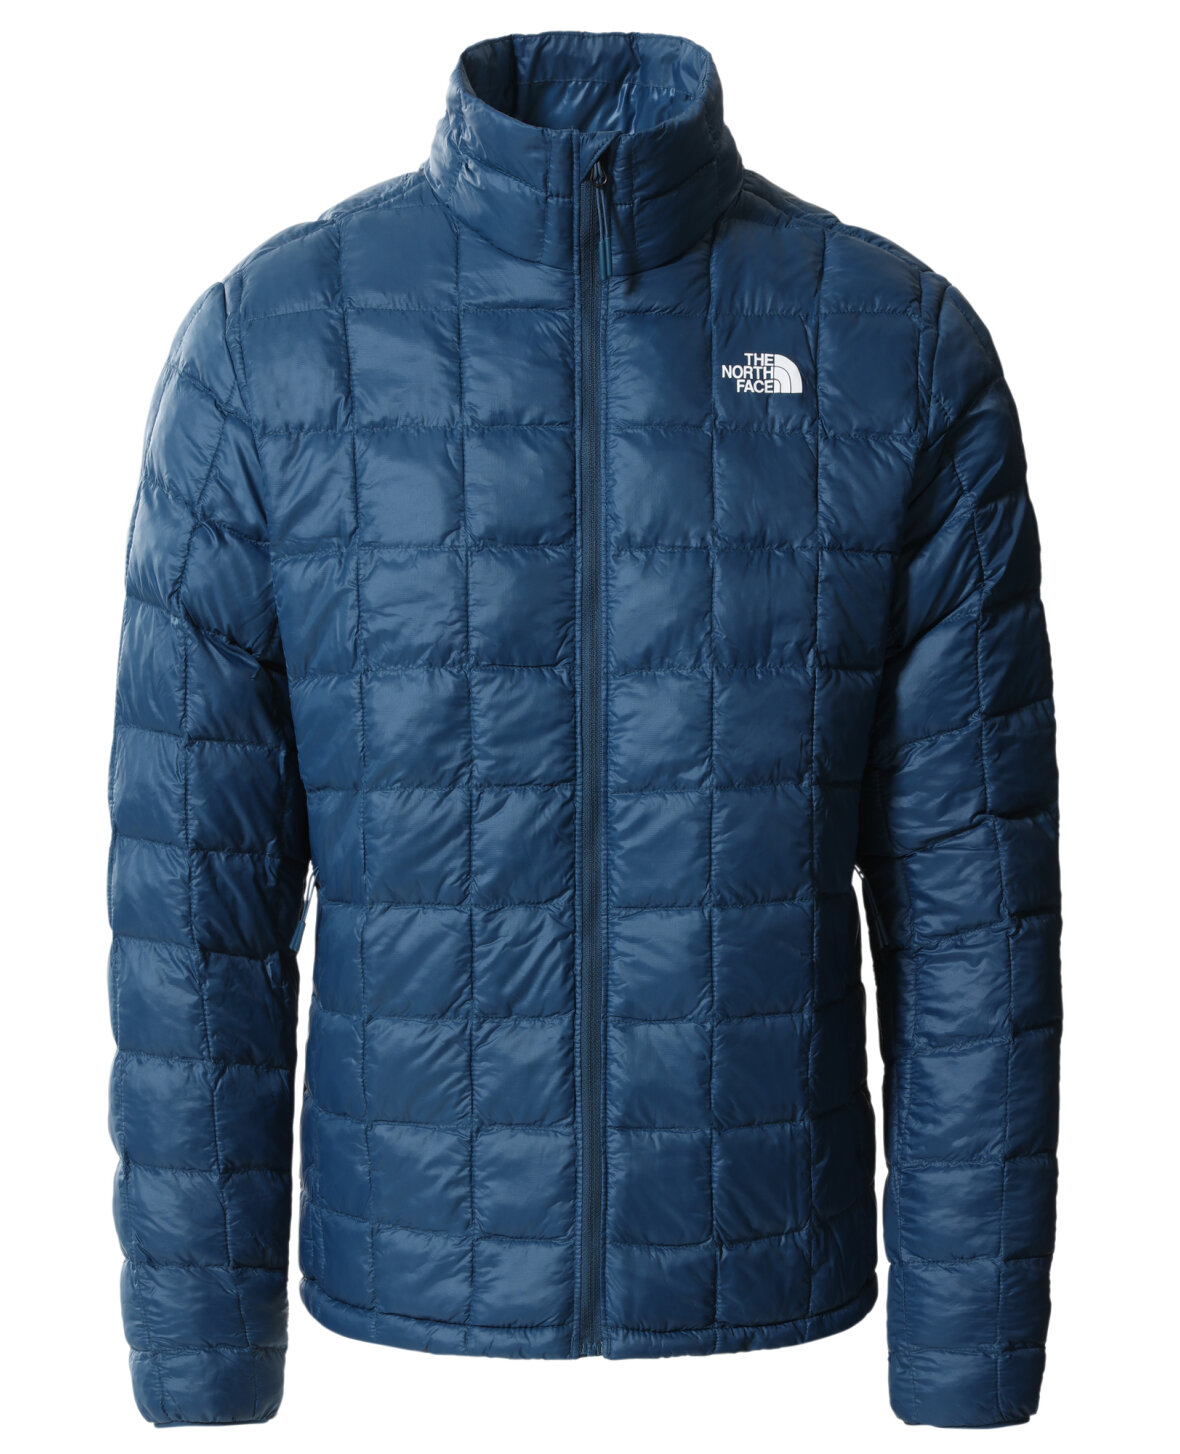 DUNJAKKER - THE NORTH FACE - M THERMOBALL ECO JKT